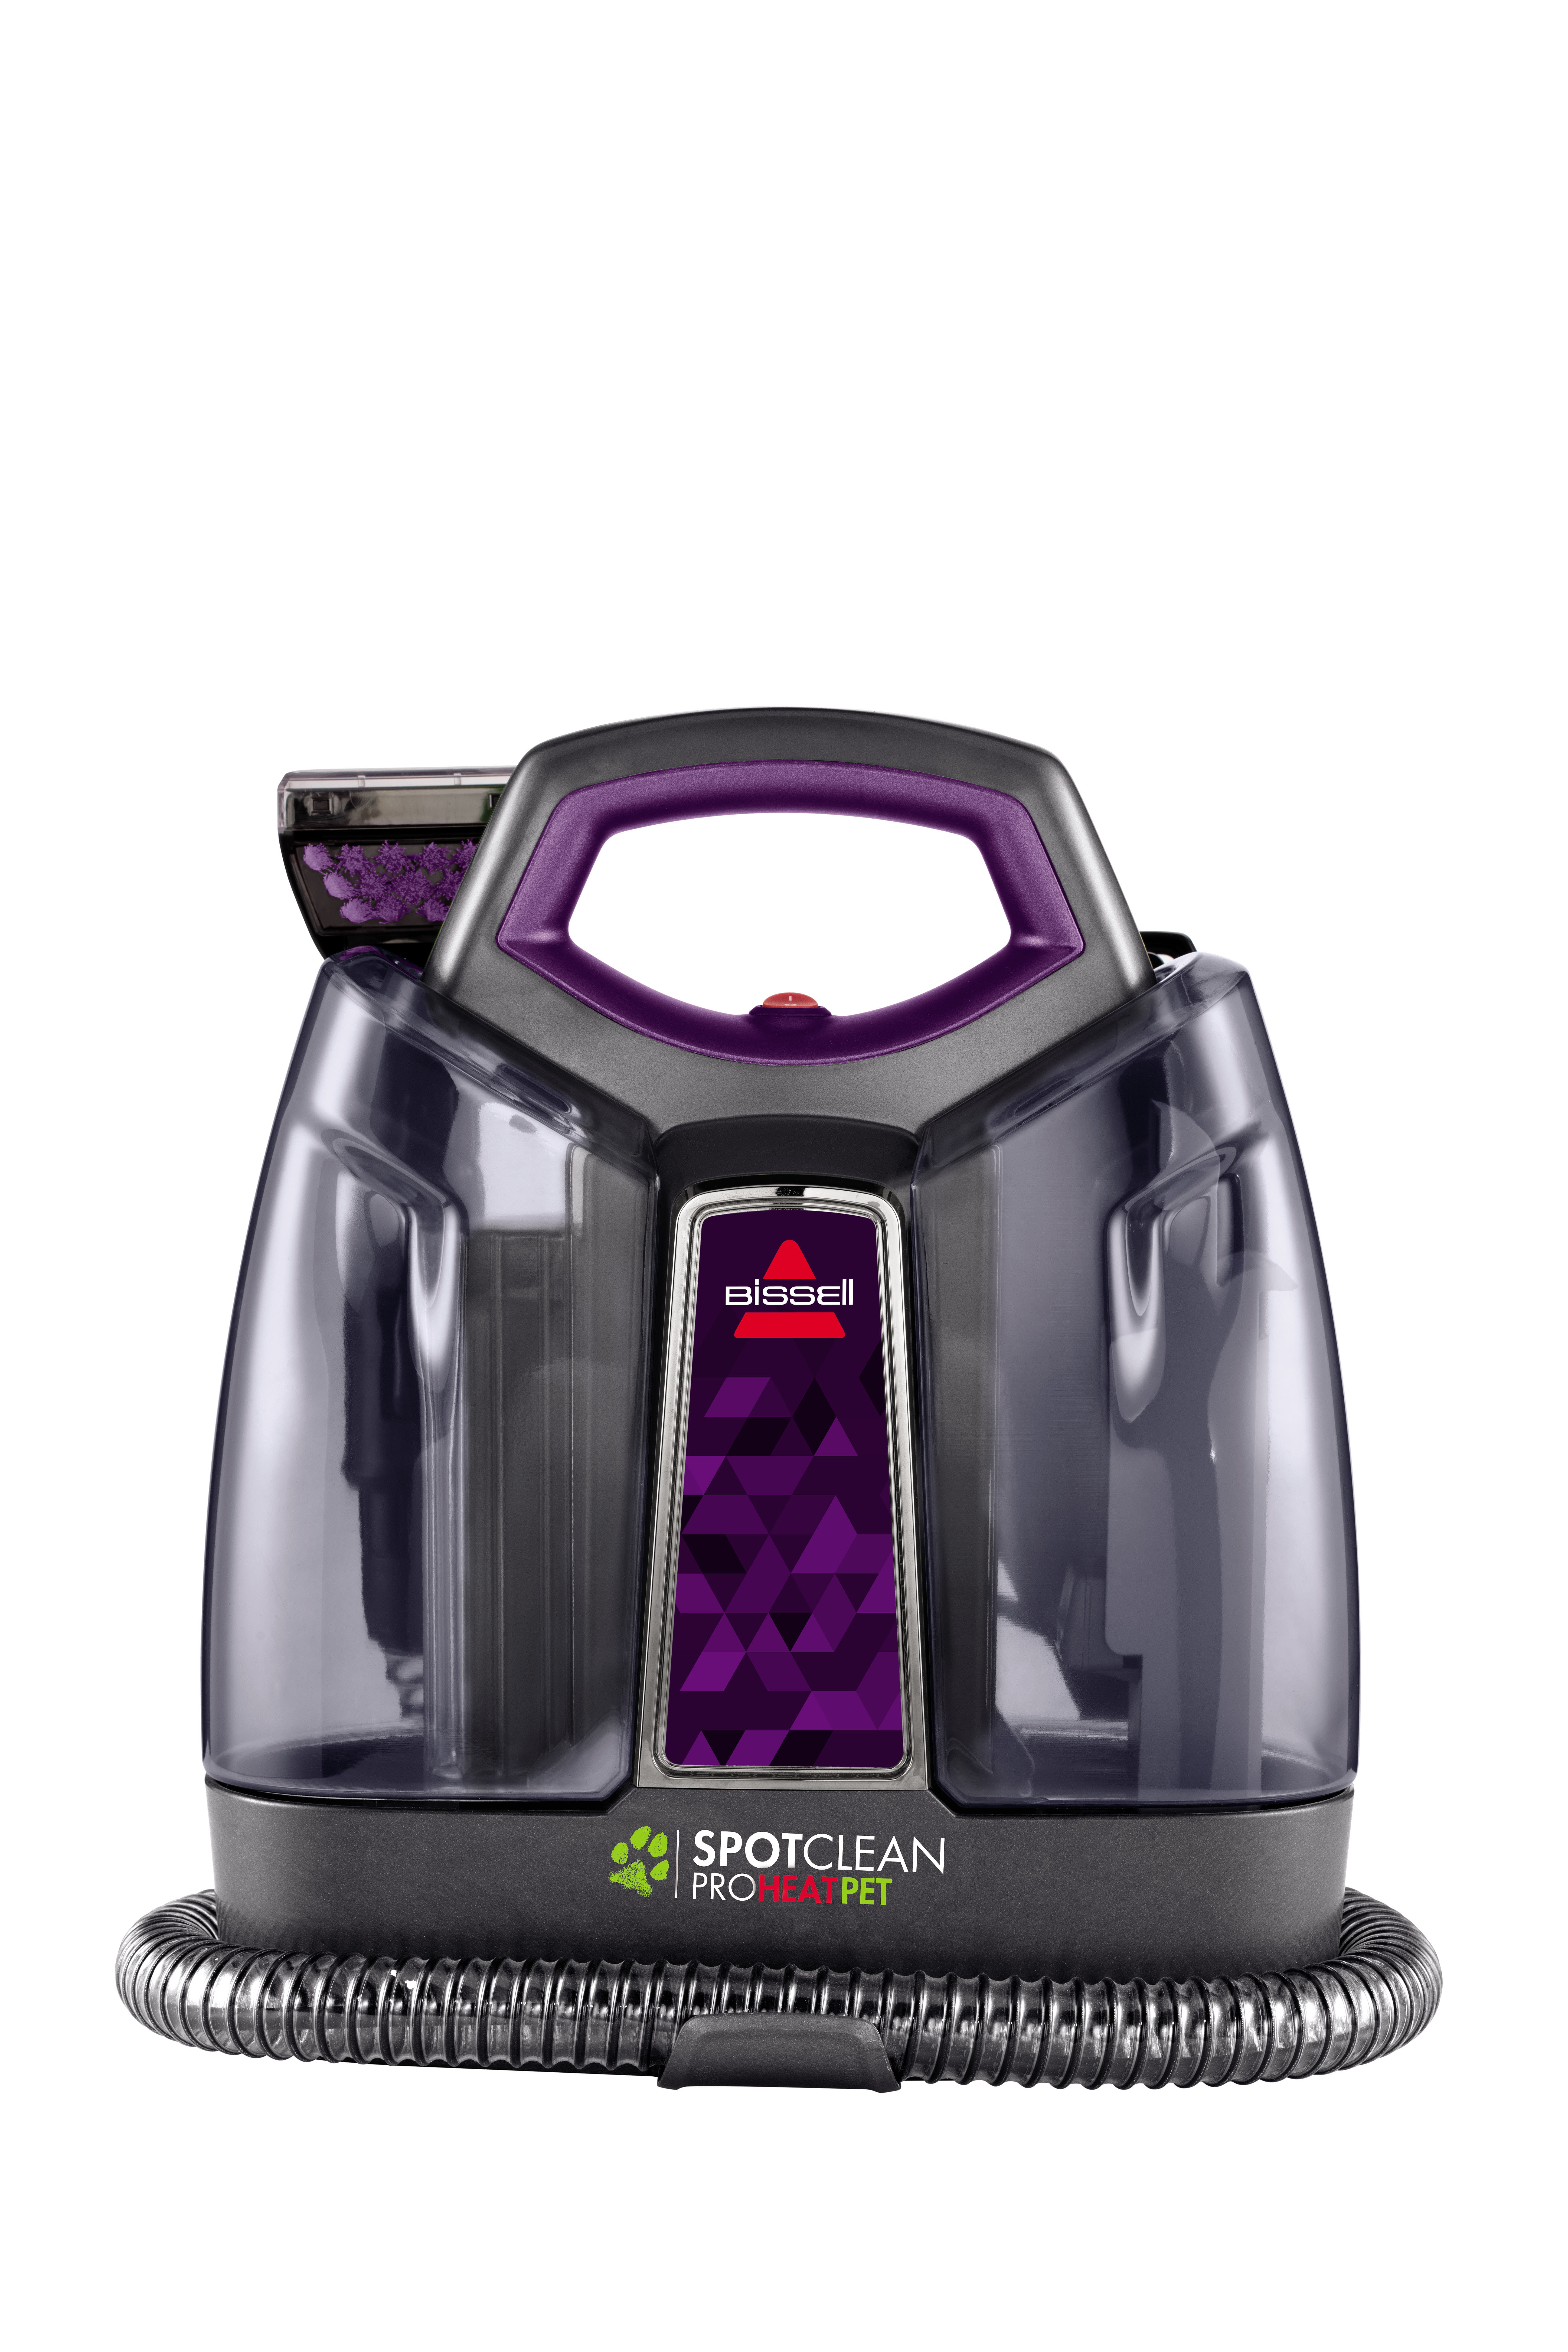 handheld carpet cleaners for pet stains